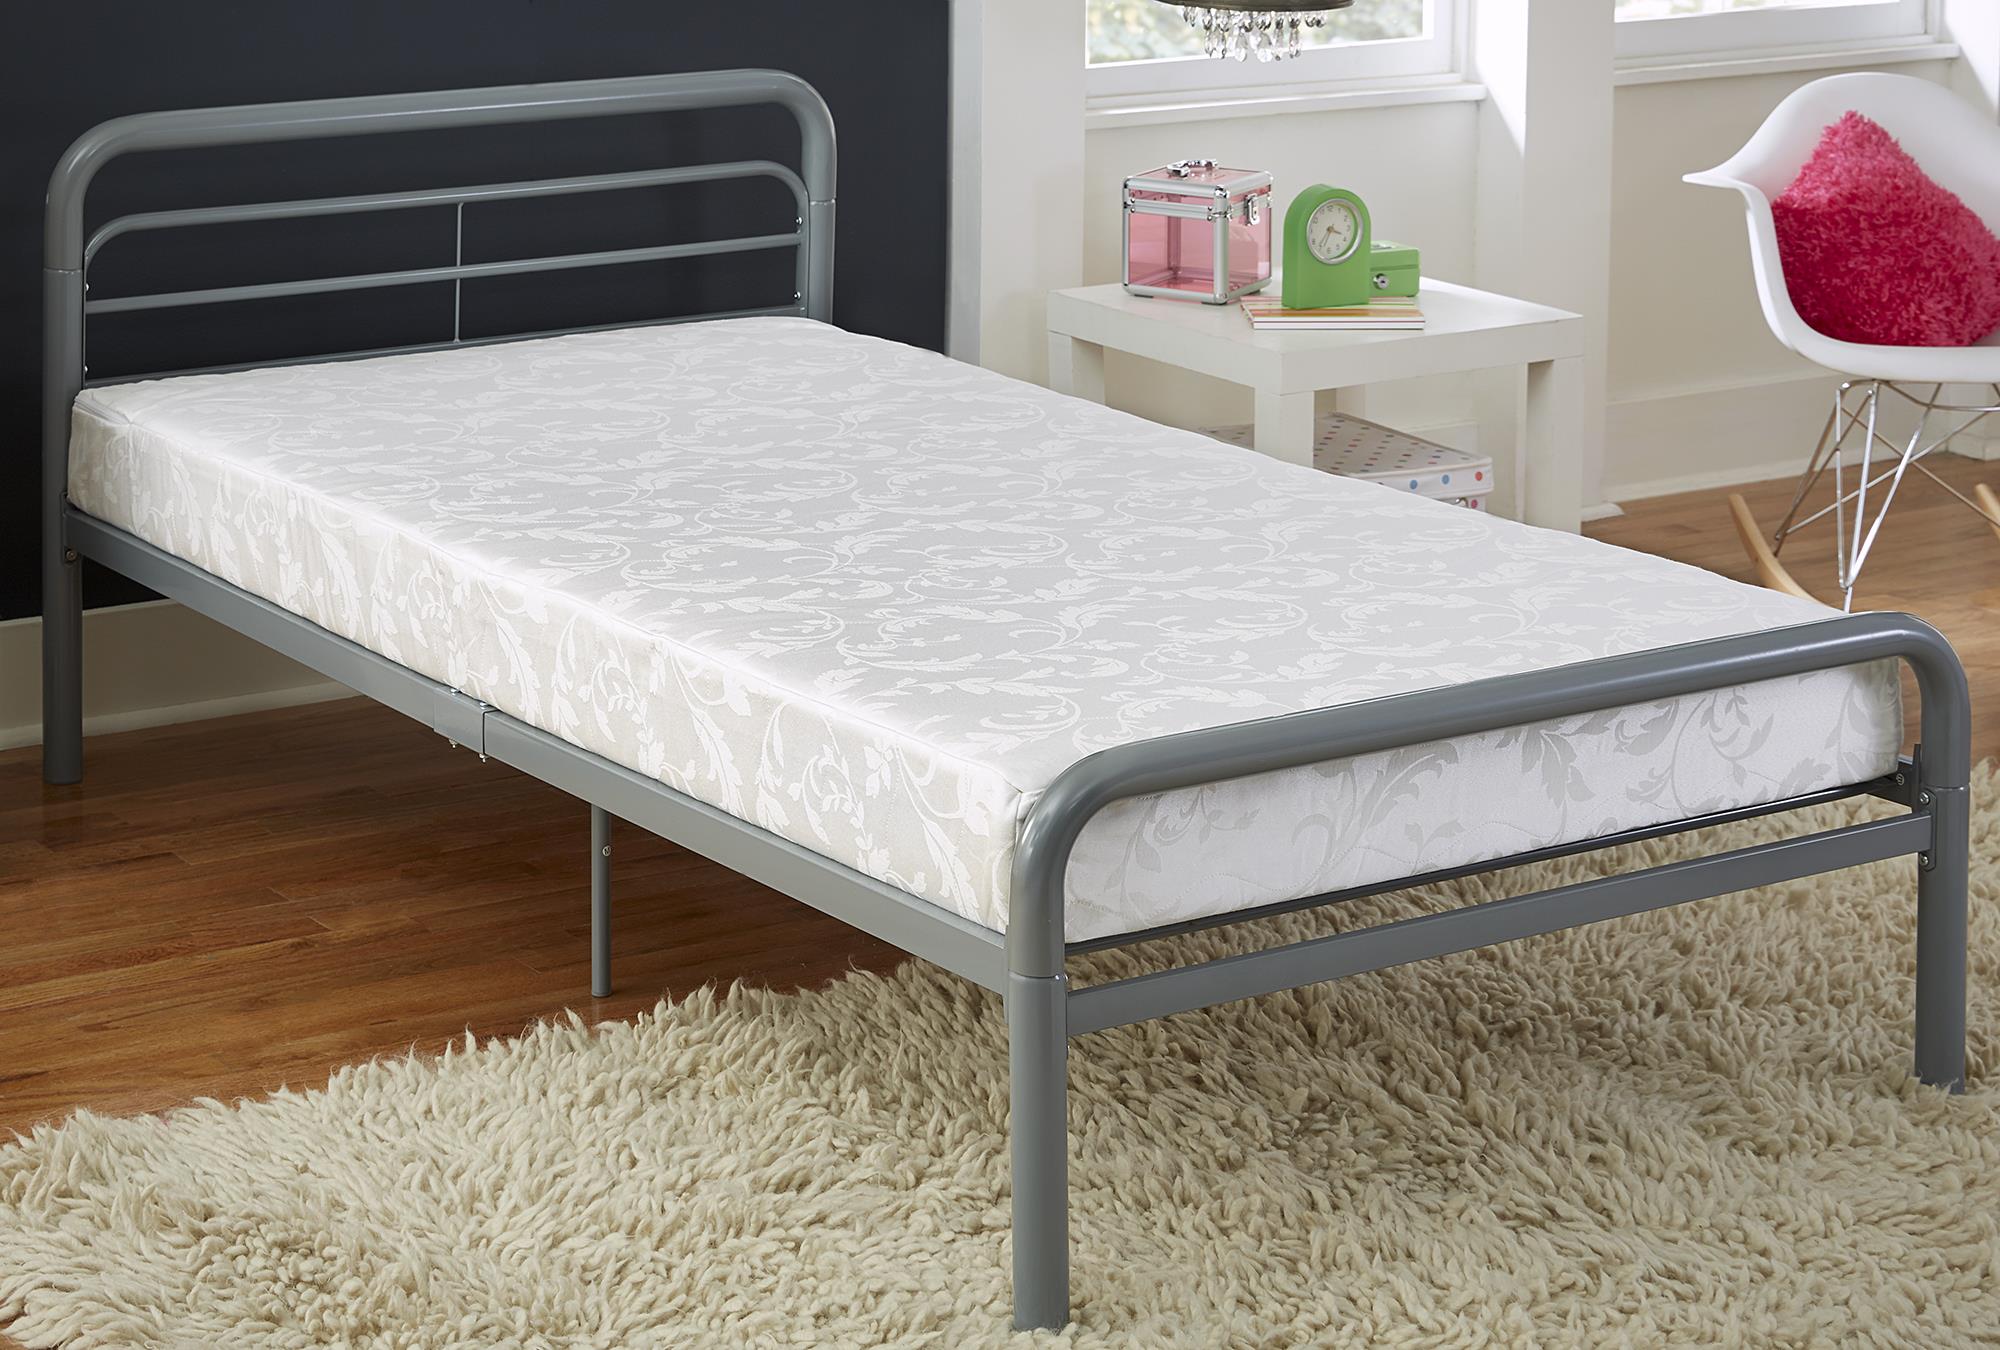 DHP Value 6 Inch Polyester Filled Bunk Bed Mattress with Jacquard Cover, Twin, White - image 1 of 9